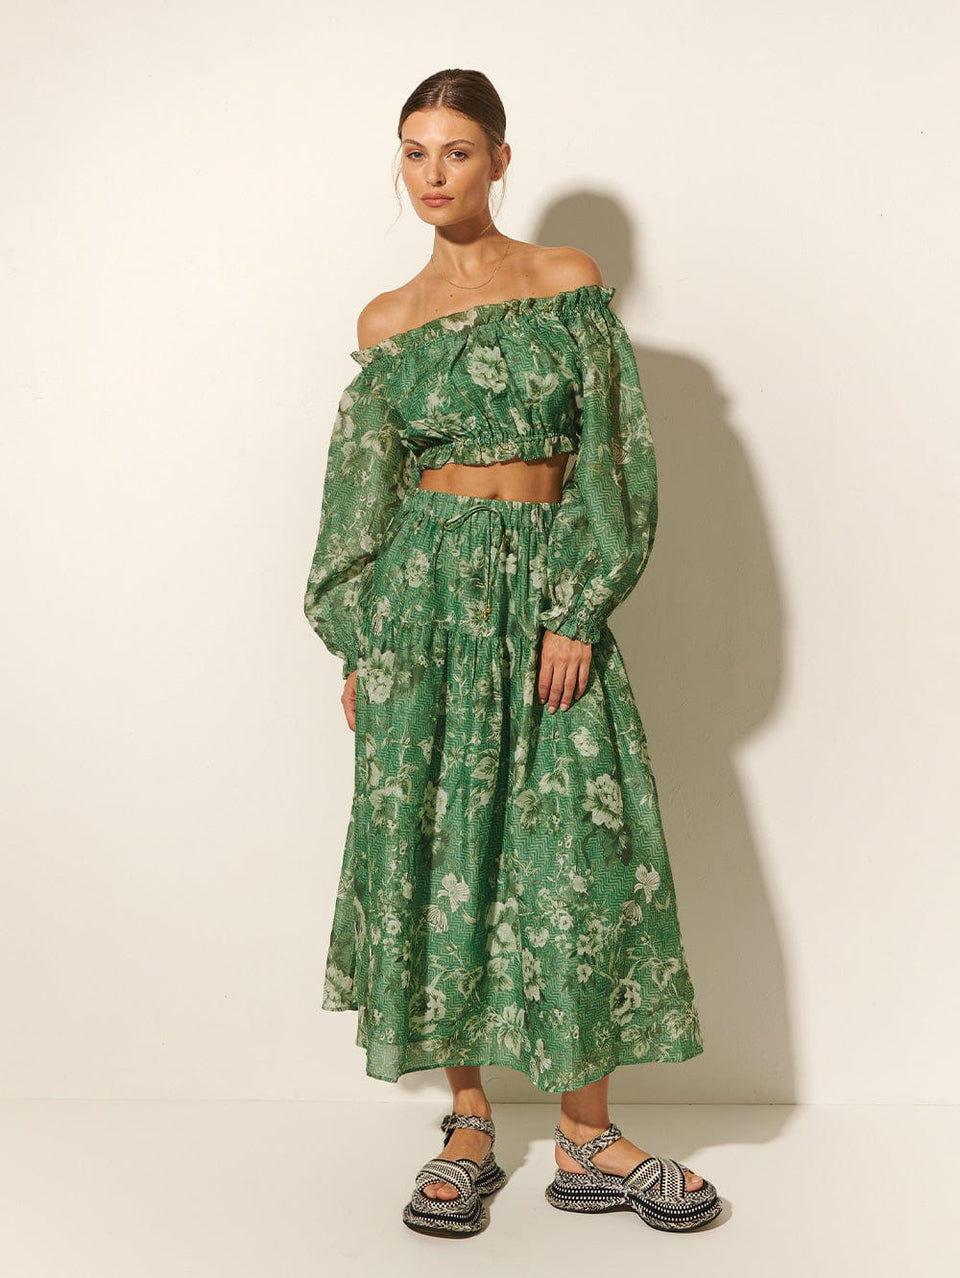 Studio model wears KIVARI Khalo Crop Top: A green floral off-the-shoulder top with full-length blouson sleeves and elasticated bust, waist and sleeve details.\